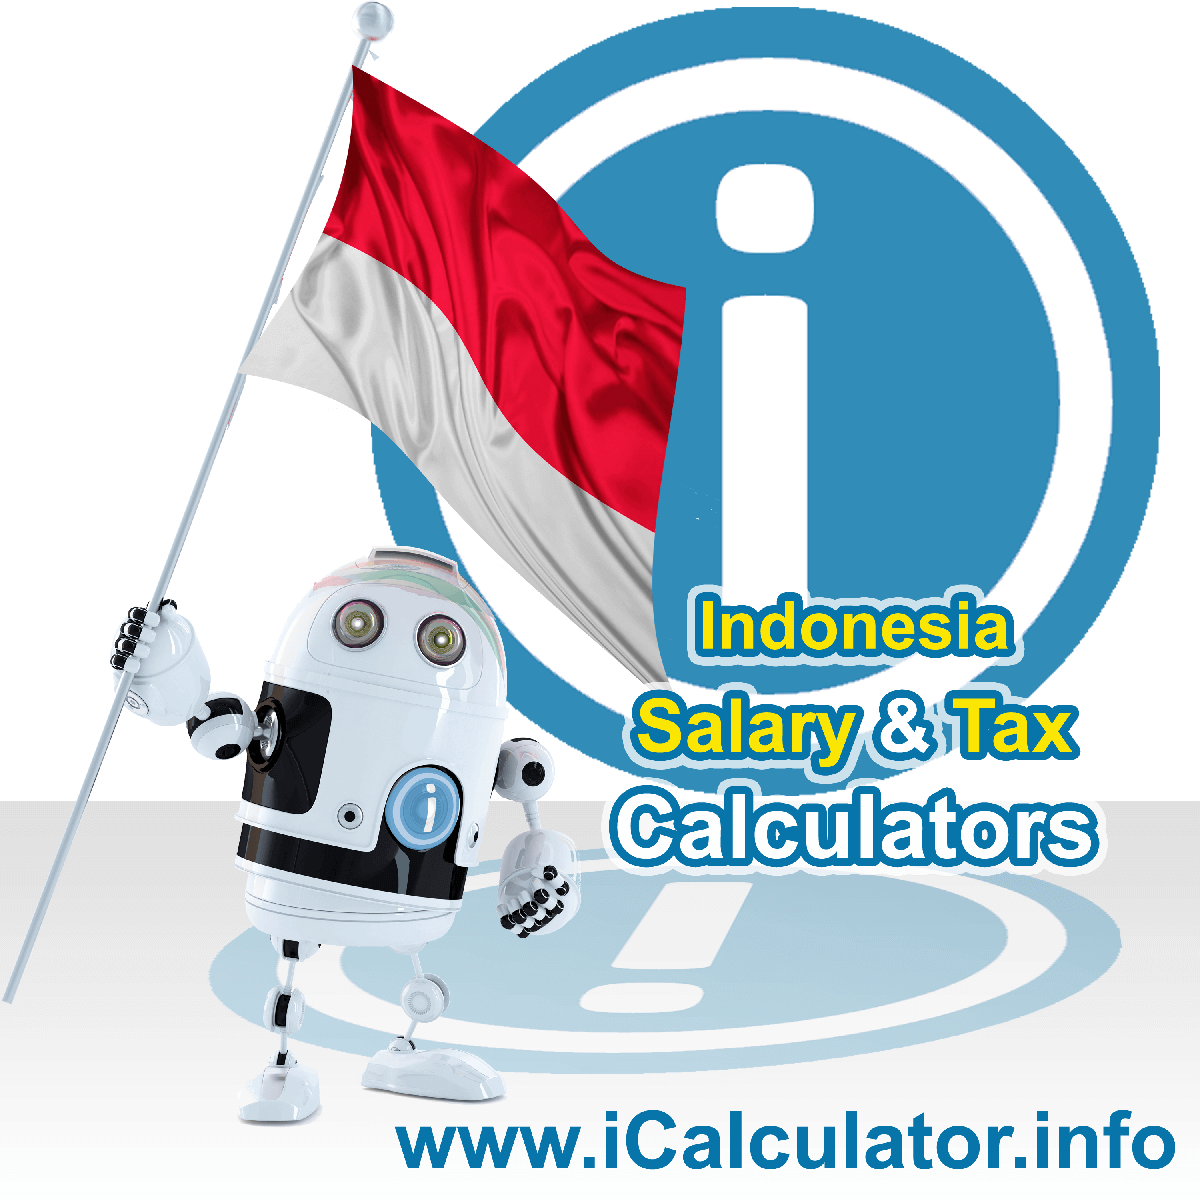 Indonesia Wage Calculator. This image shows the Indonesia flag and information relating to the tax formula for the Indonesia Tax Calculator